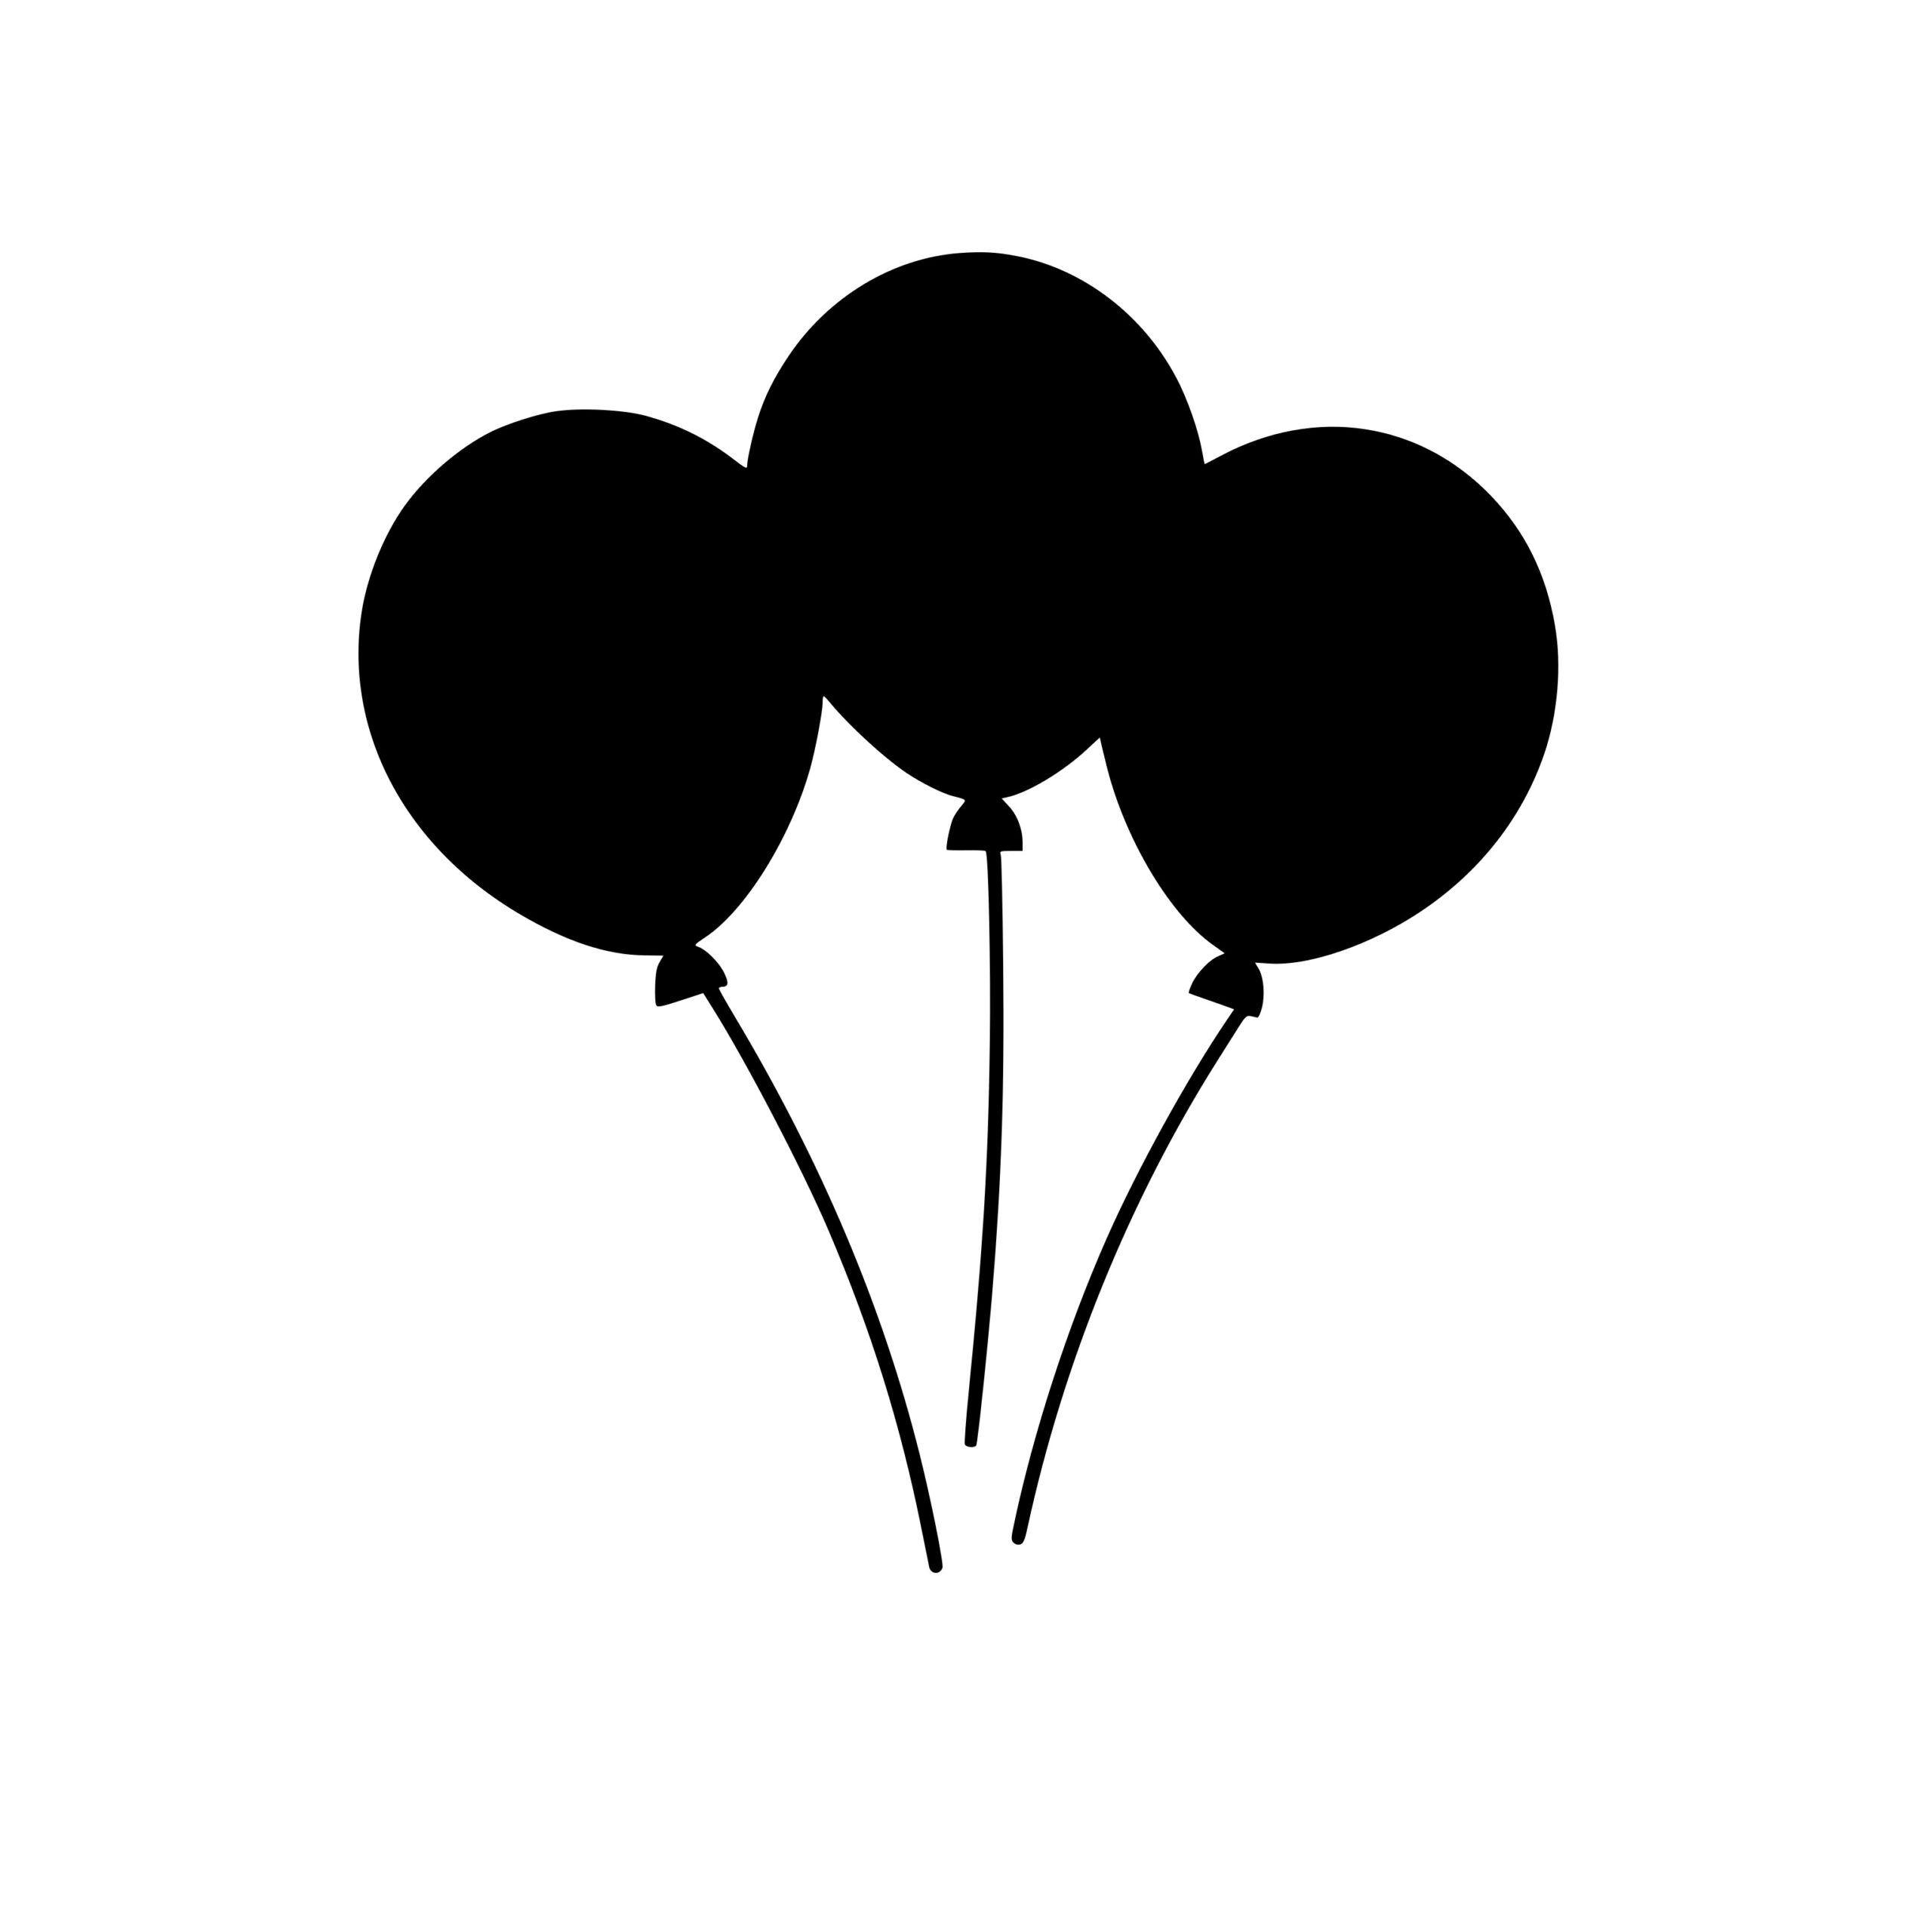 Balloon Bouquet SVG File for Cricut, Silhouette and Laser Machines